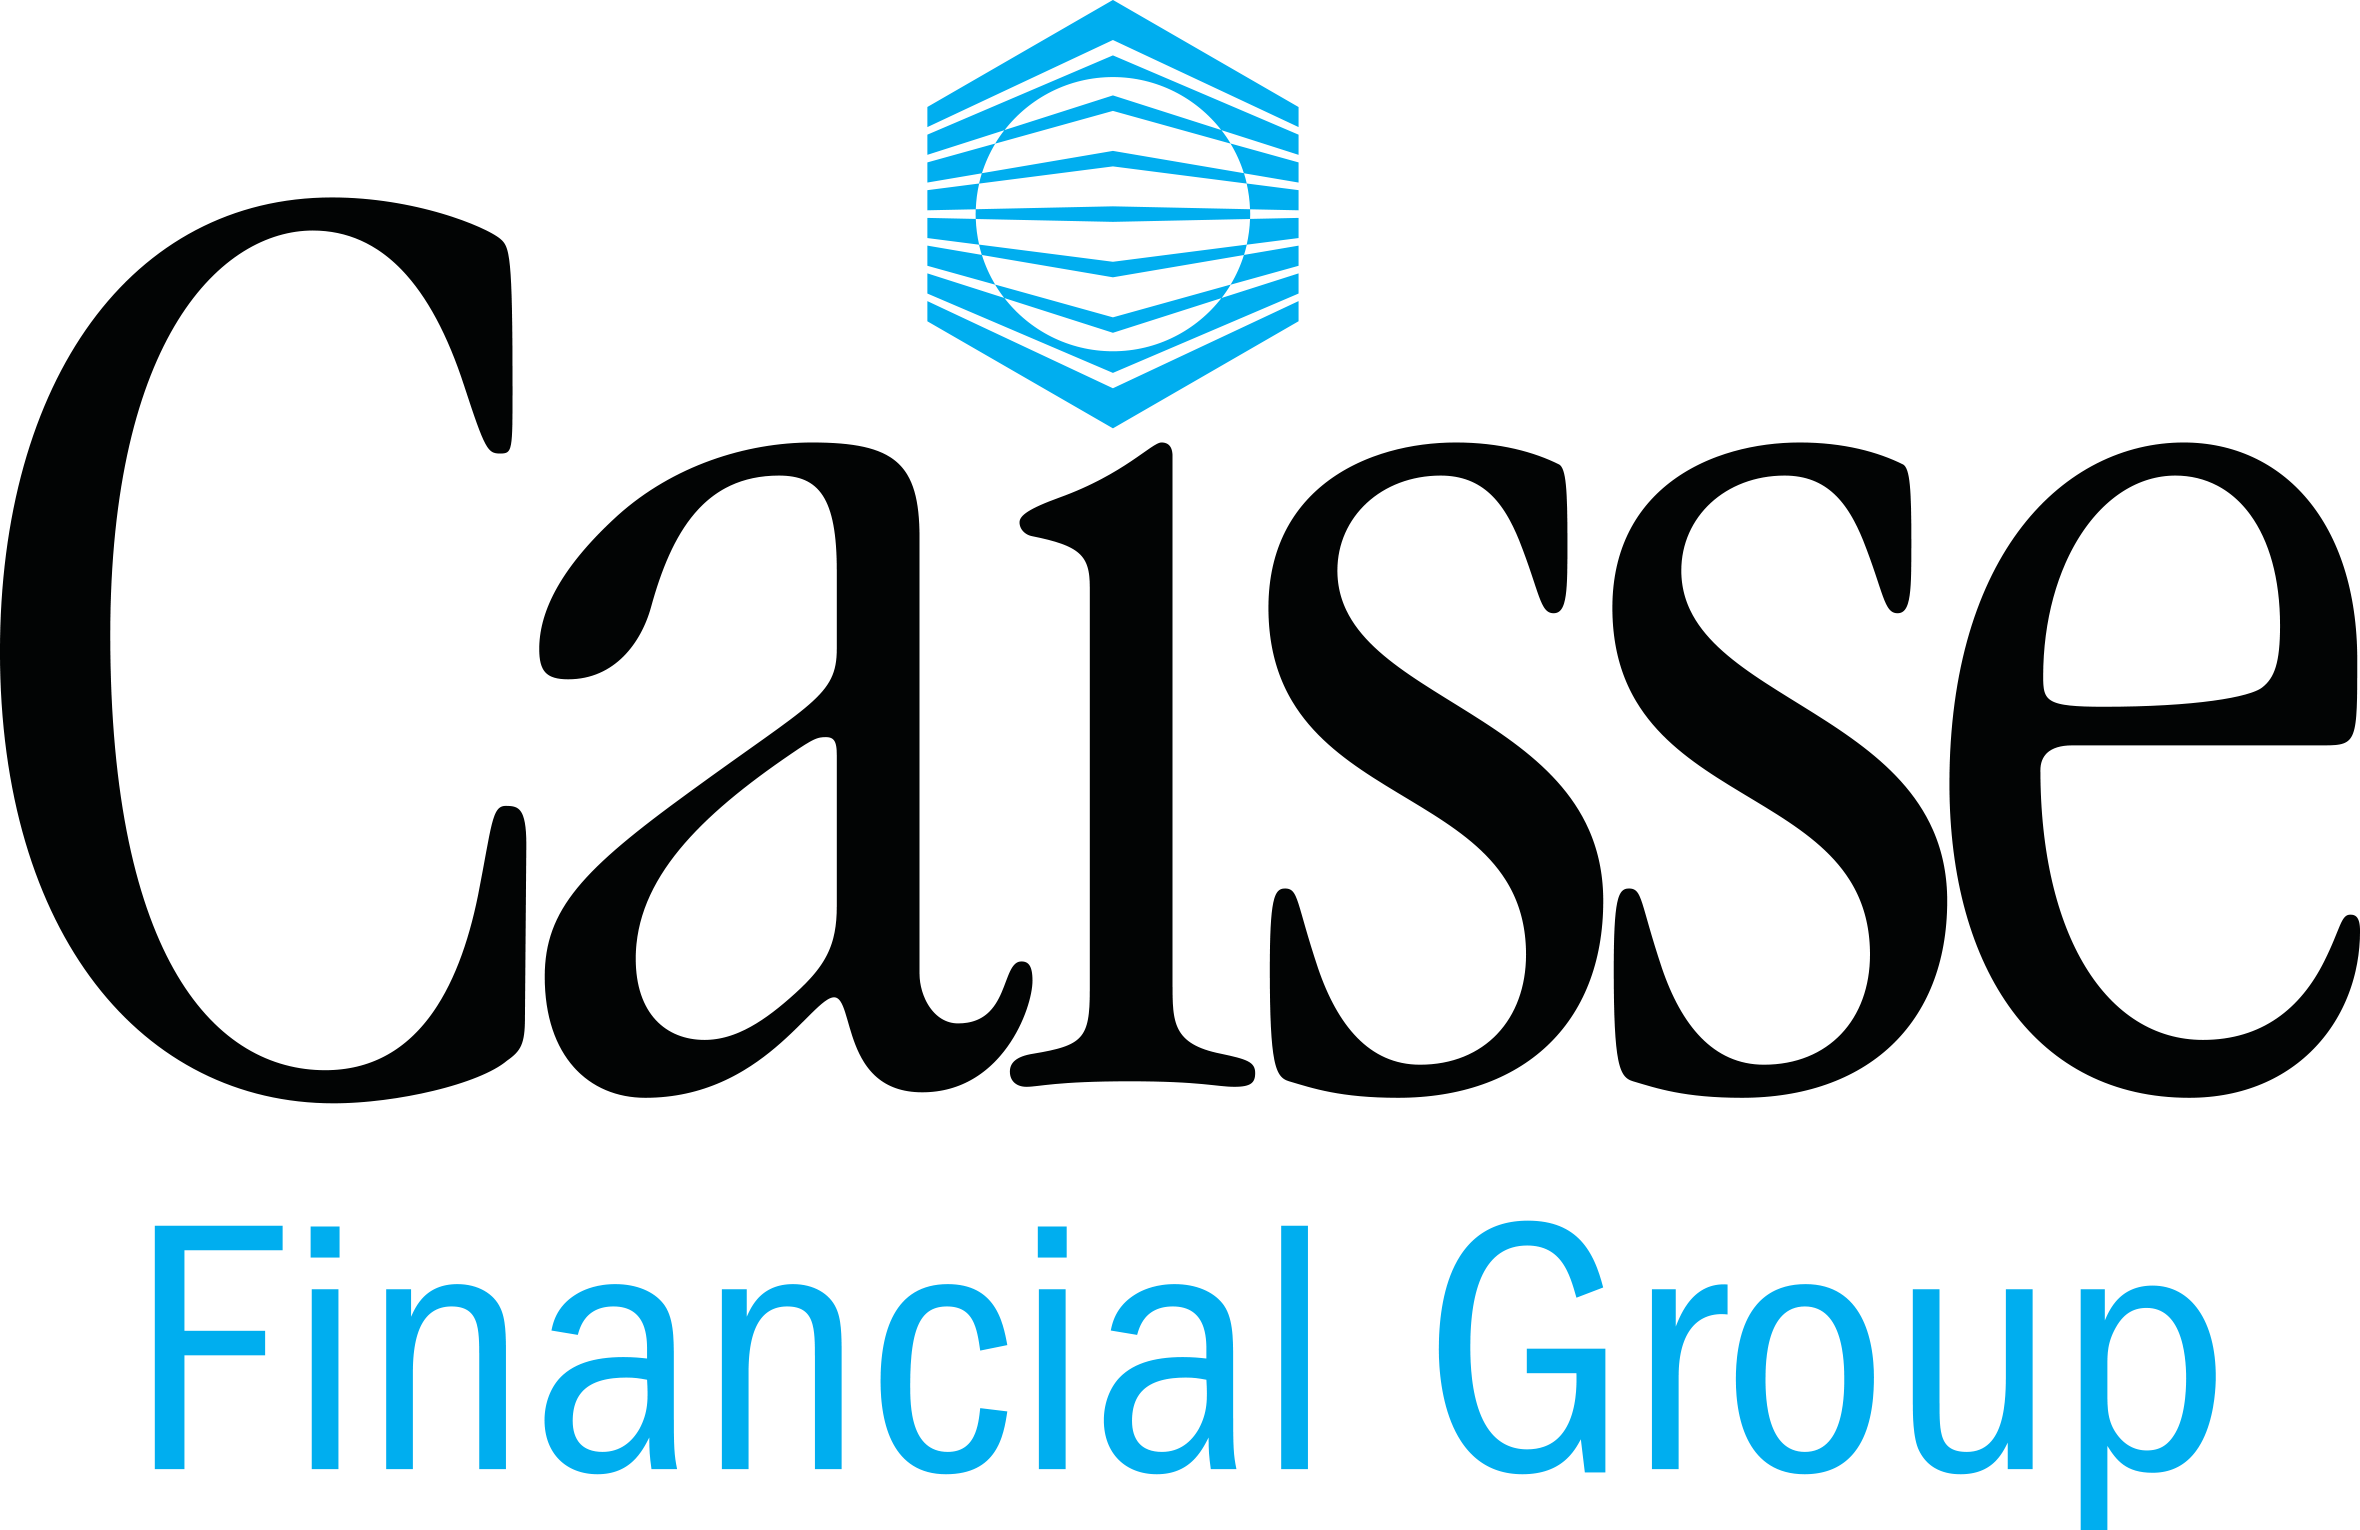 Caisse Financial Group opens in a new window